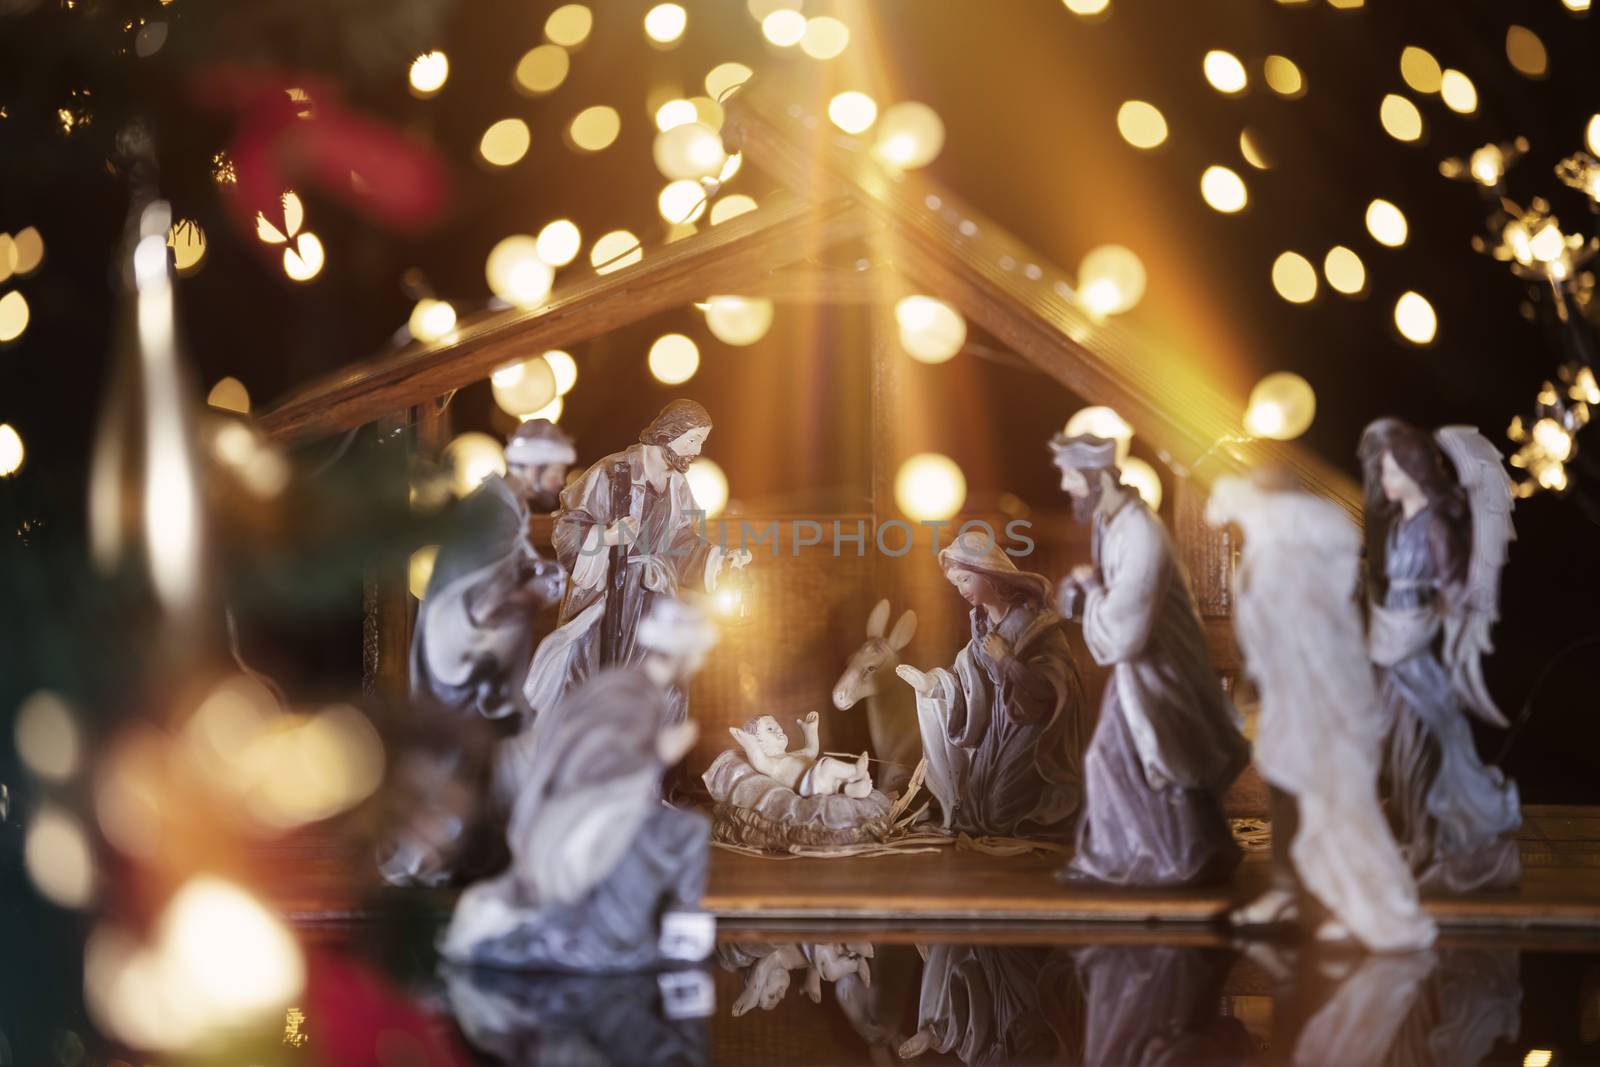 Christmas Manger scene with figurines including Jesus, Mary, Joseph, sheep and wise men. Focus on baby!